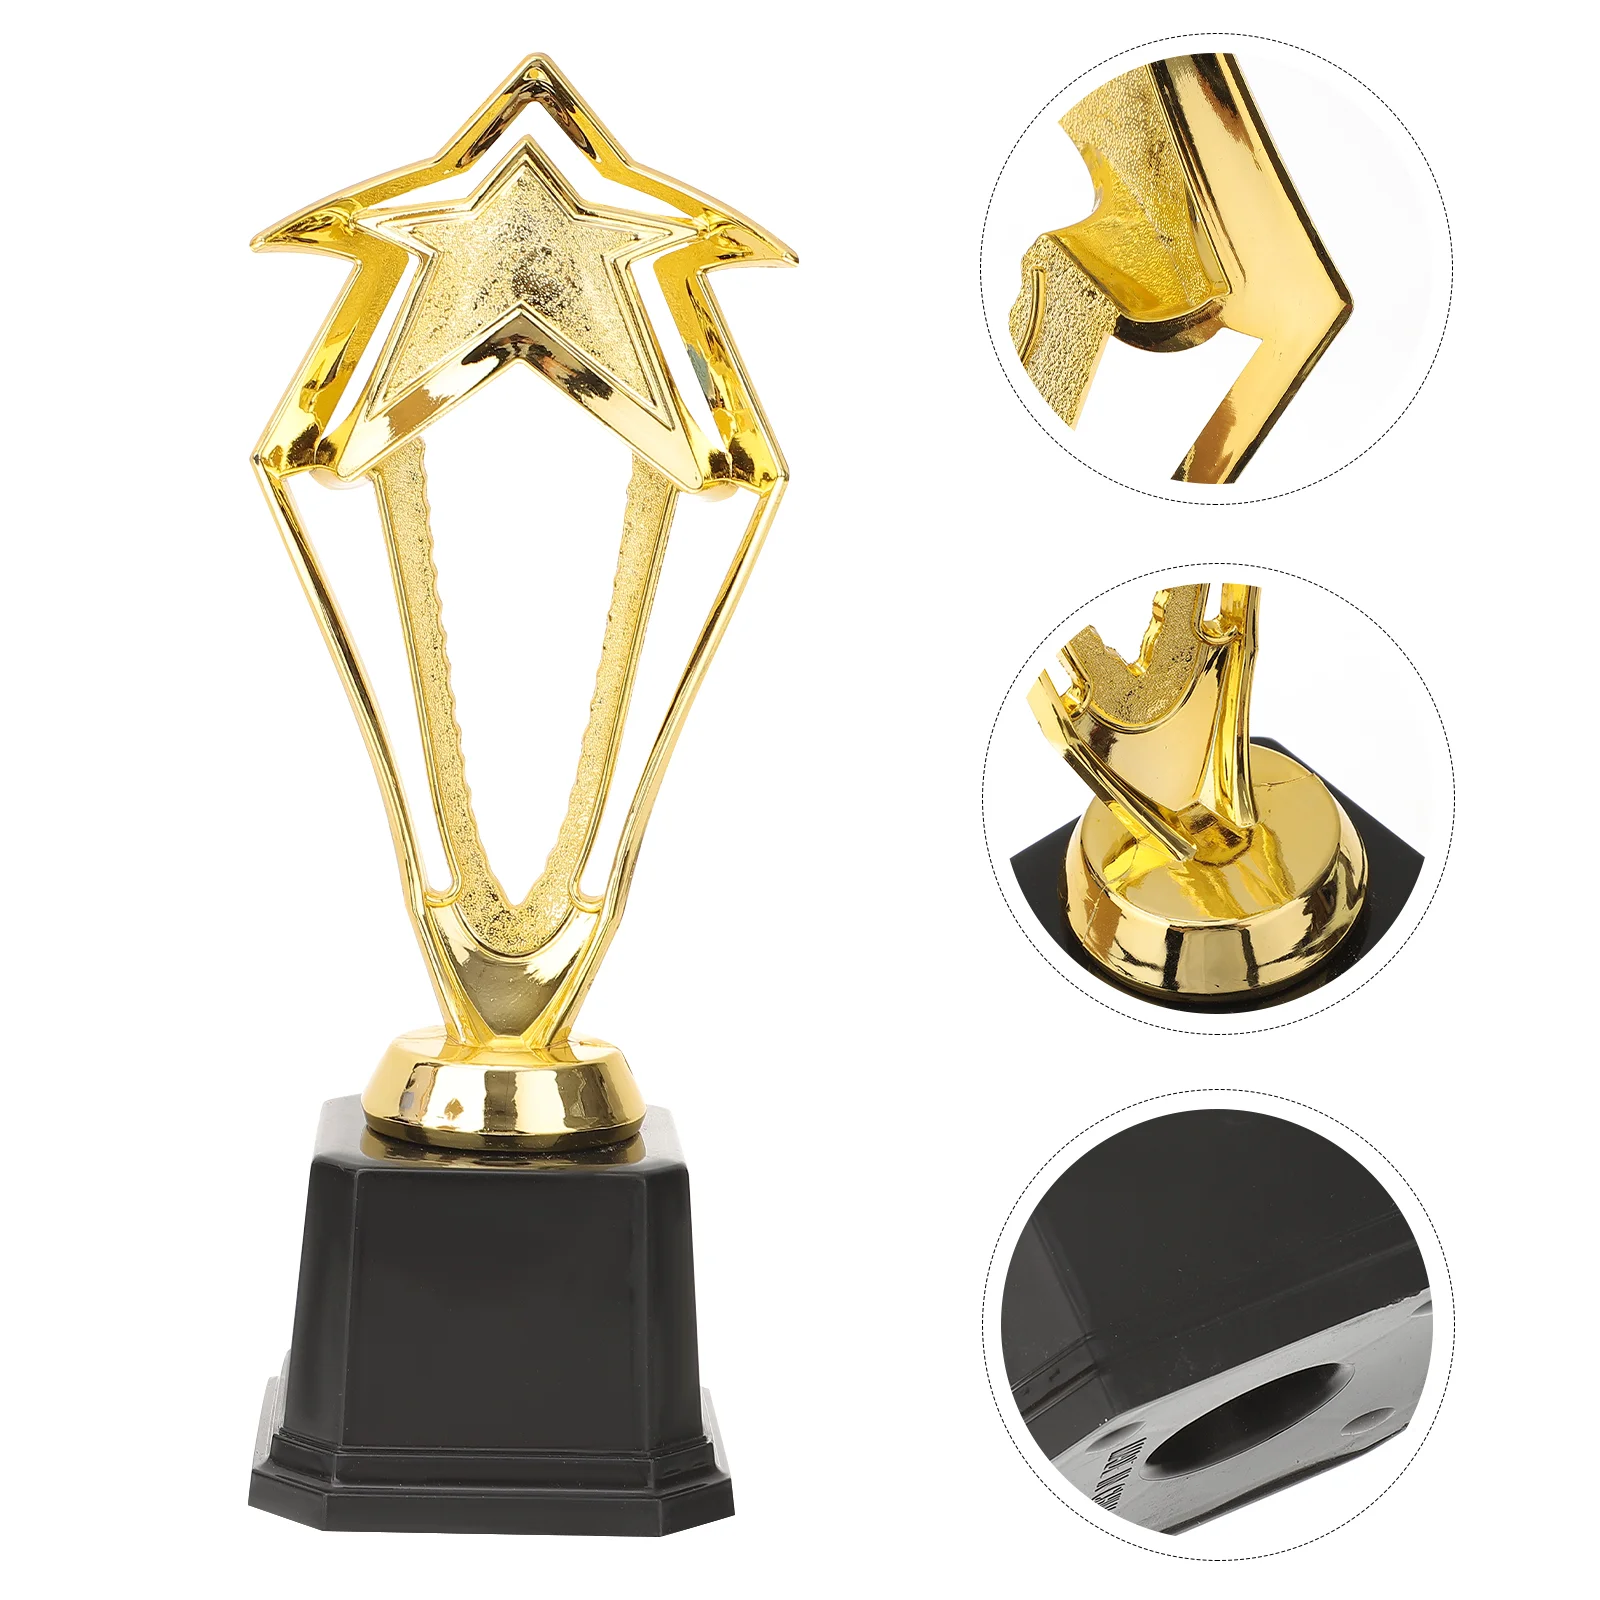 

Trophy Award Gold Prize Appreciation Trophies Plastic Cup Kids Ceremony Gift Football Toys Winner Cups Basketball Gifts Star